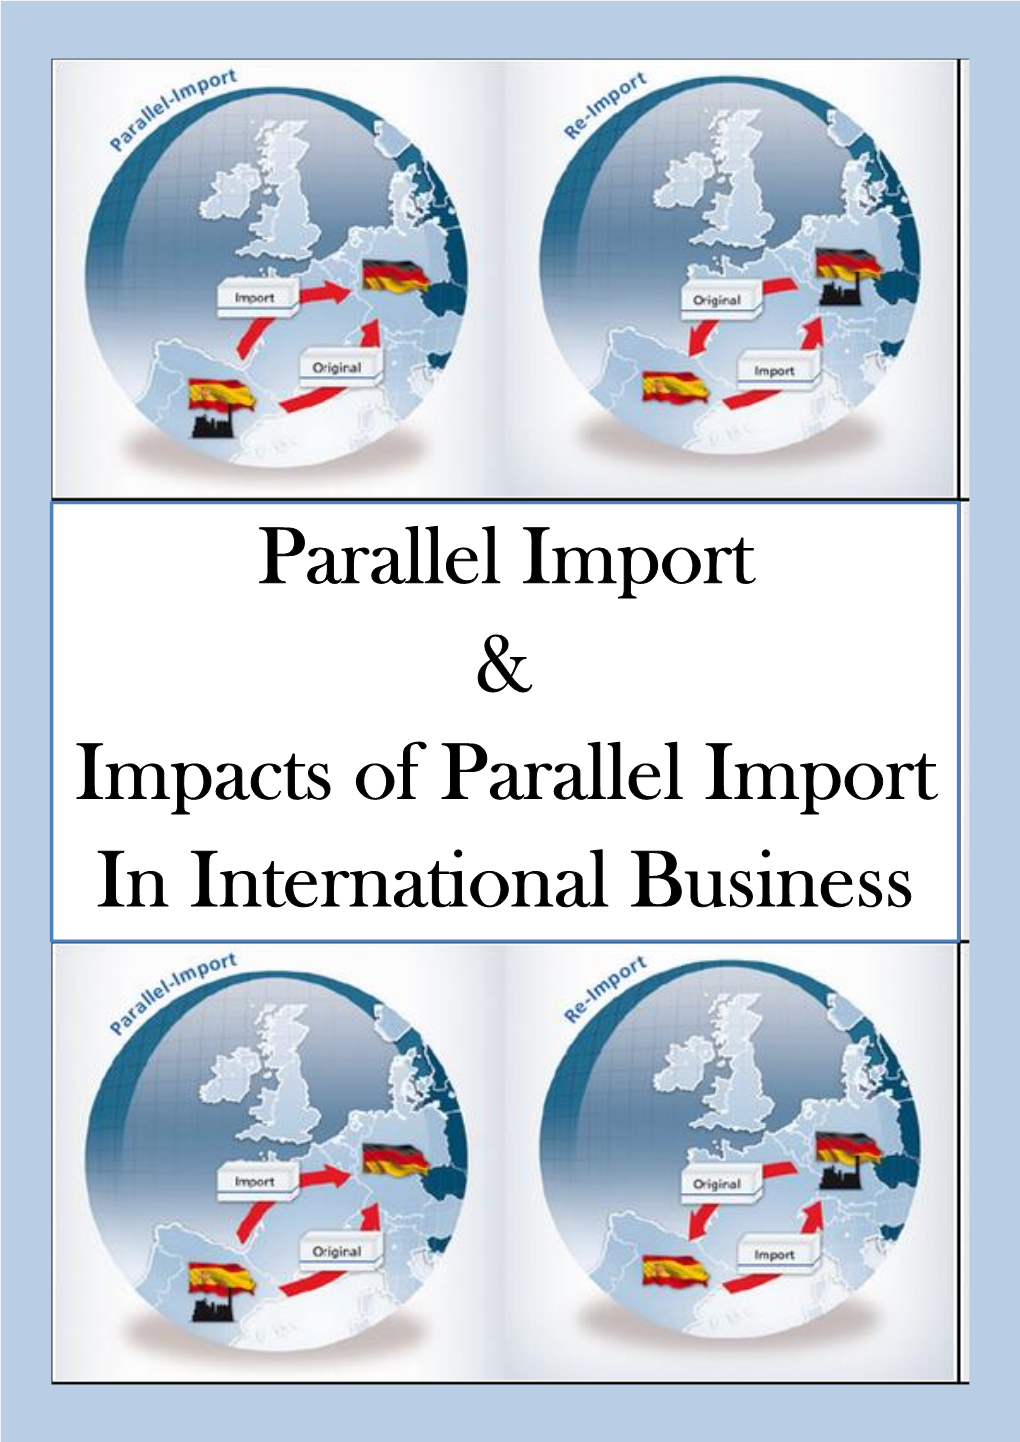 Parallel Import & Impacts of Parallel Import in International Business